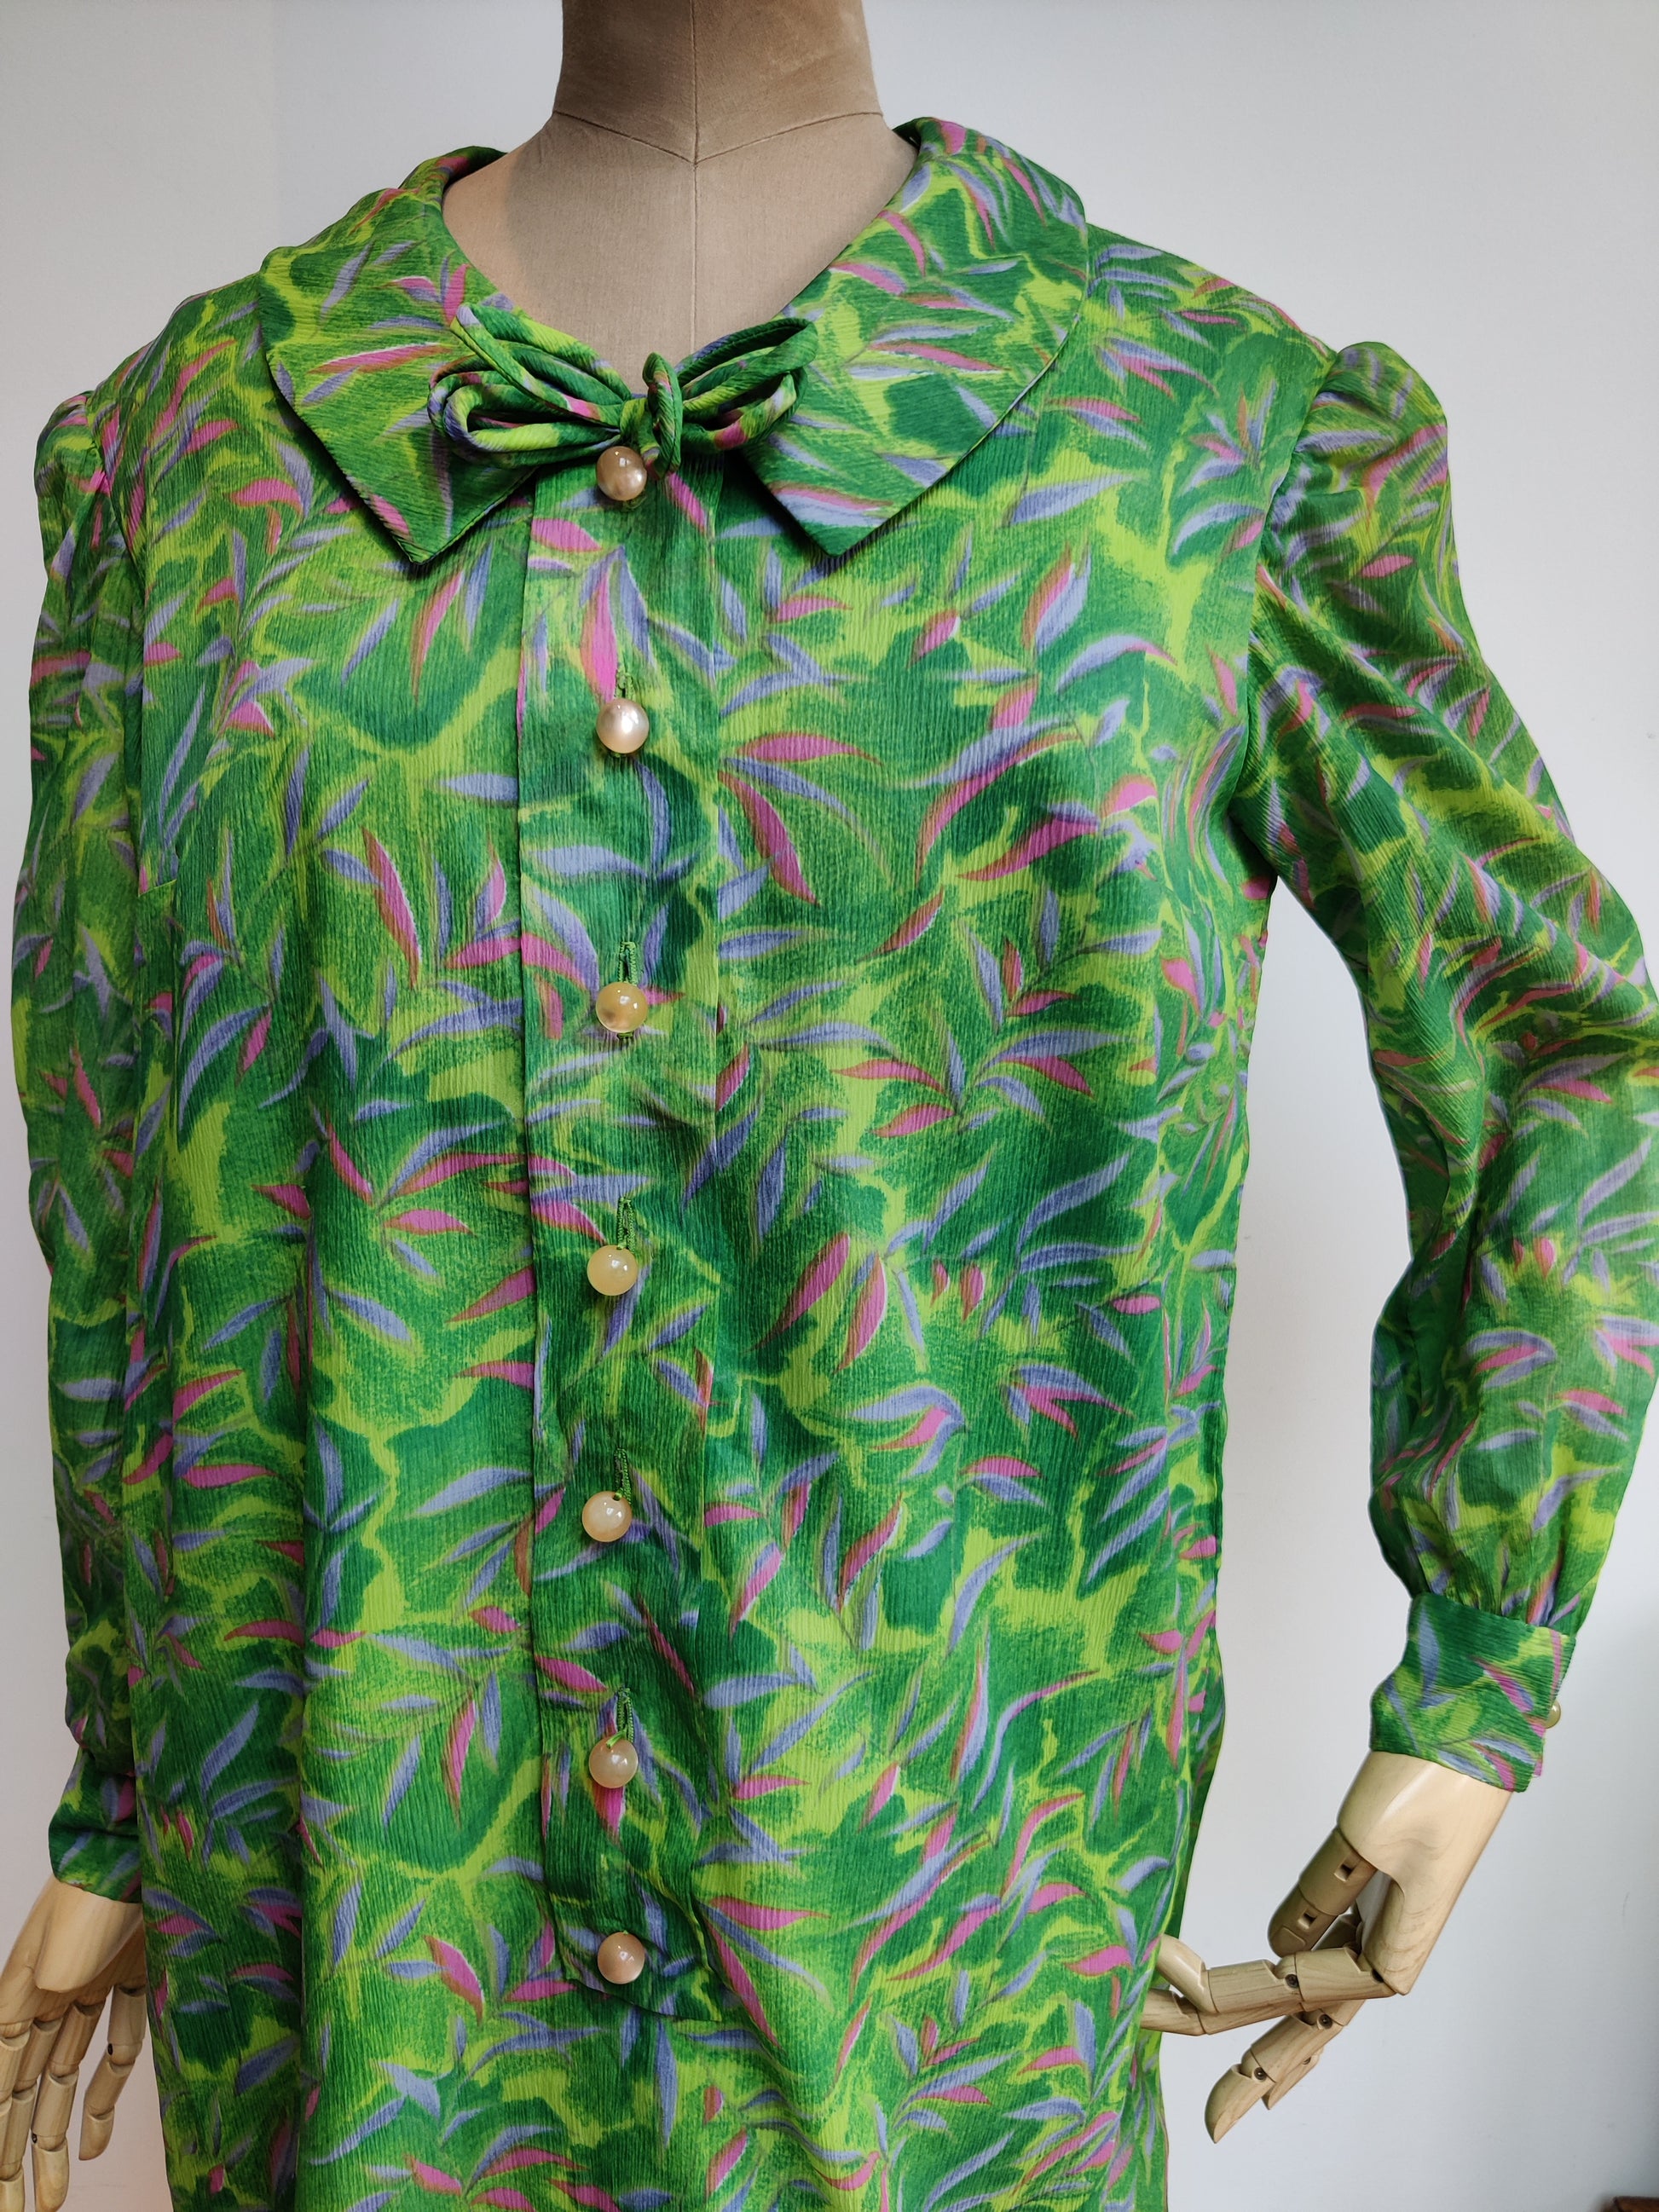 Amazing 60s long sleeve dress with psychedelic floral print